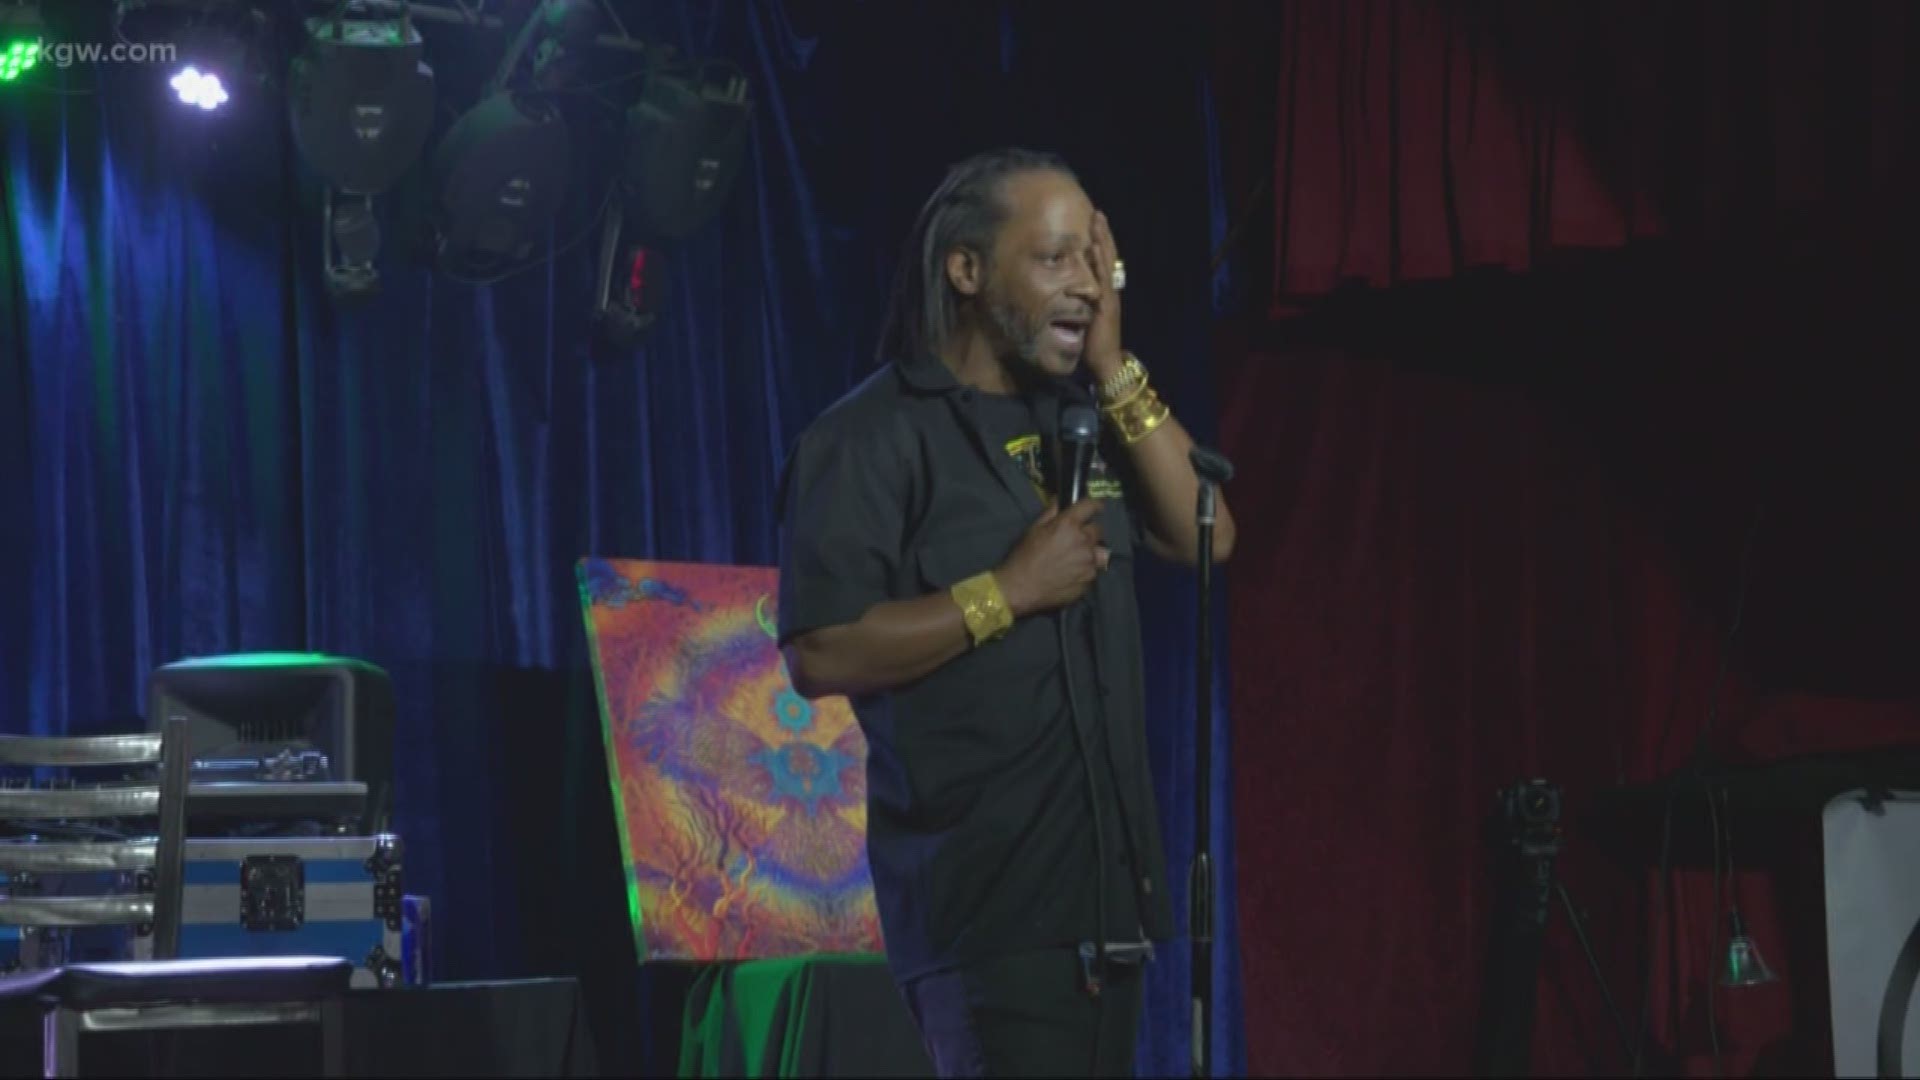 A video crew hired to shoot a stand-up routine by Katt Williams said the comedian left town without paying.